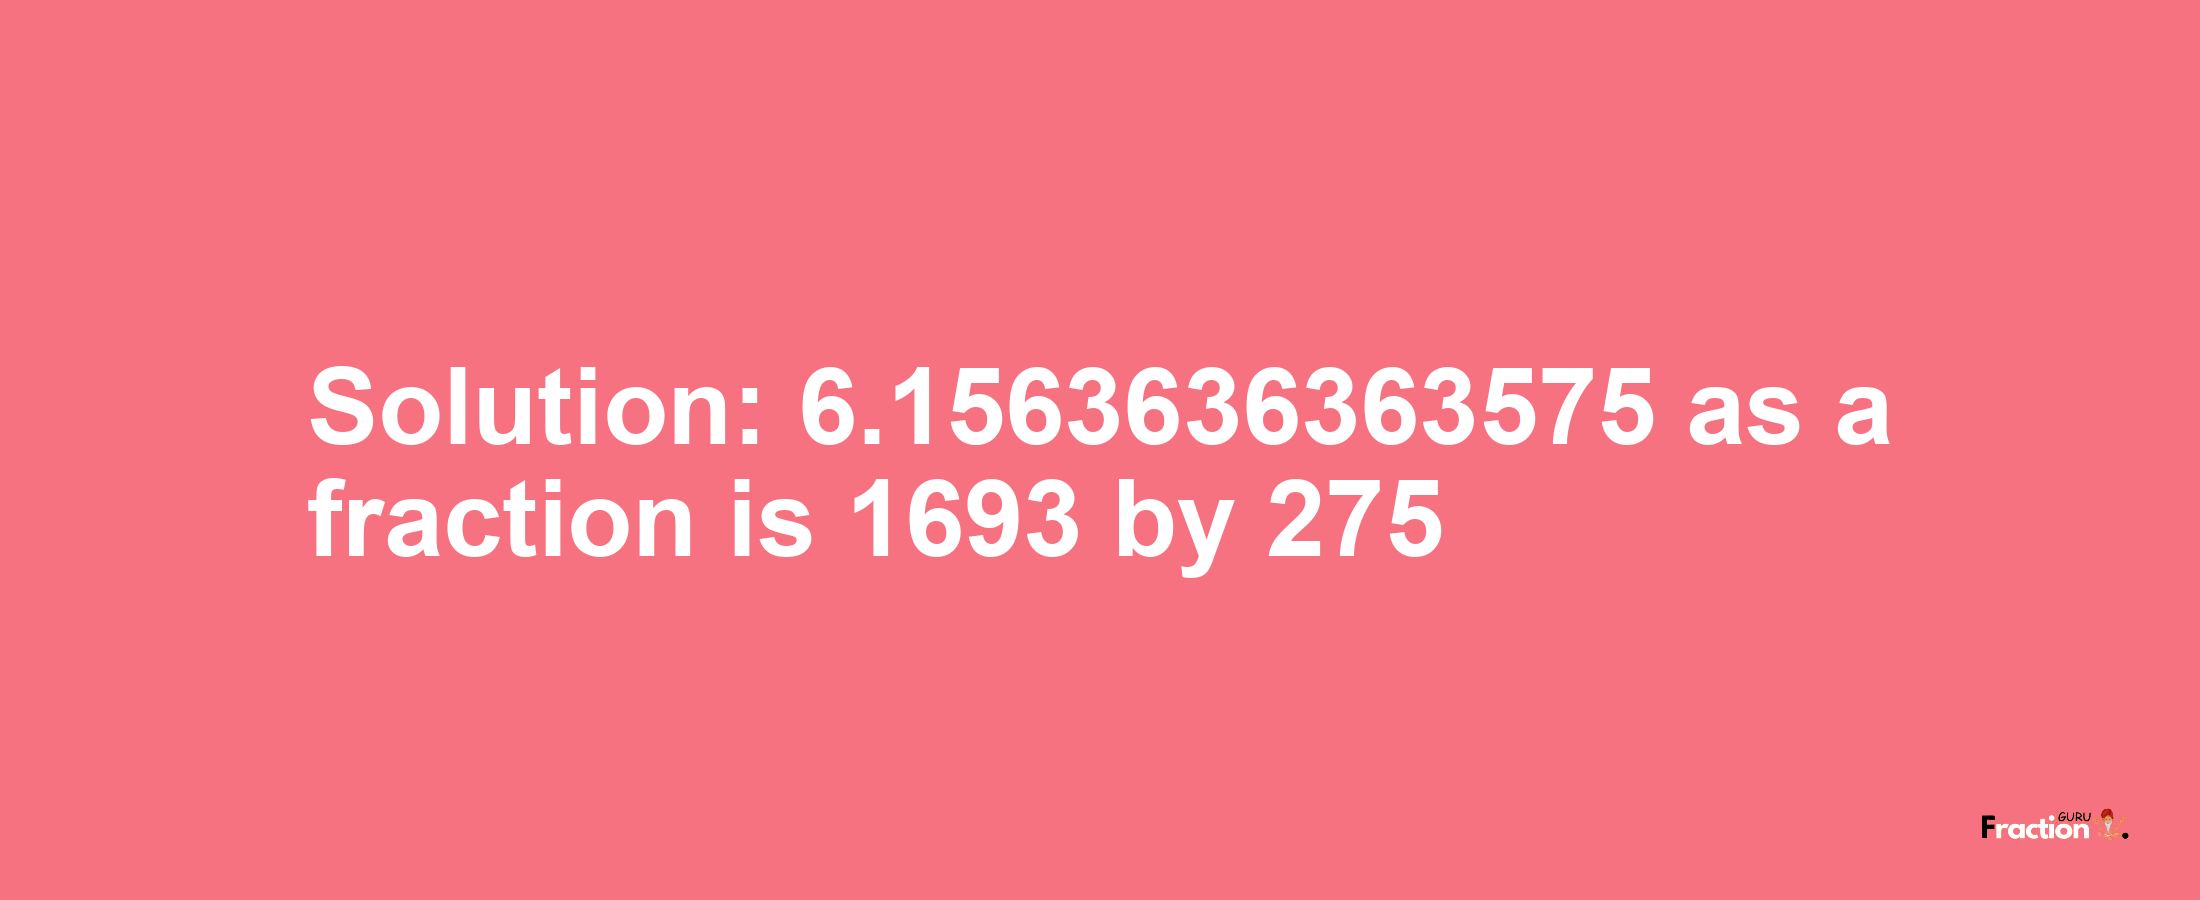 Solution:6.1563636363575 as a fraction is 1693/275